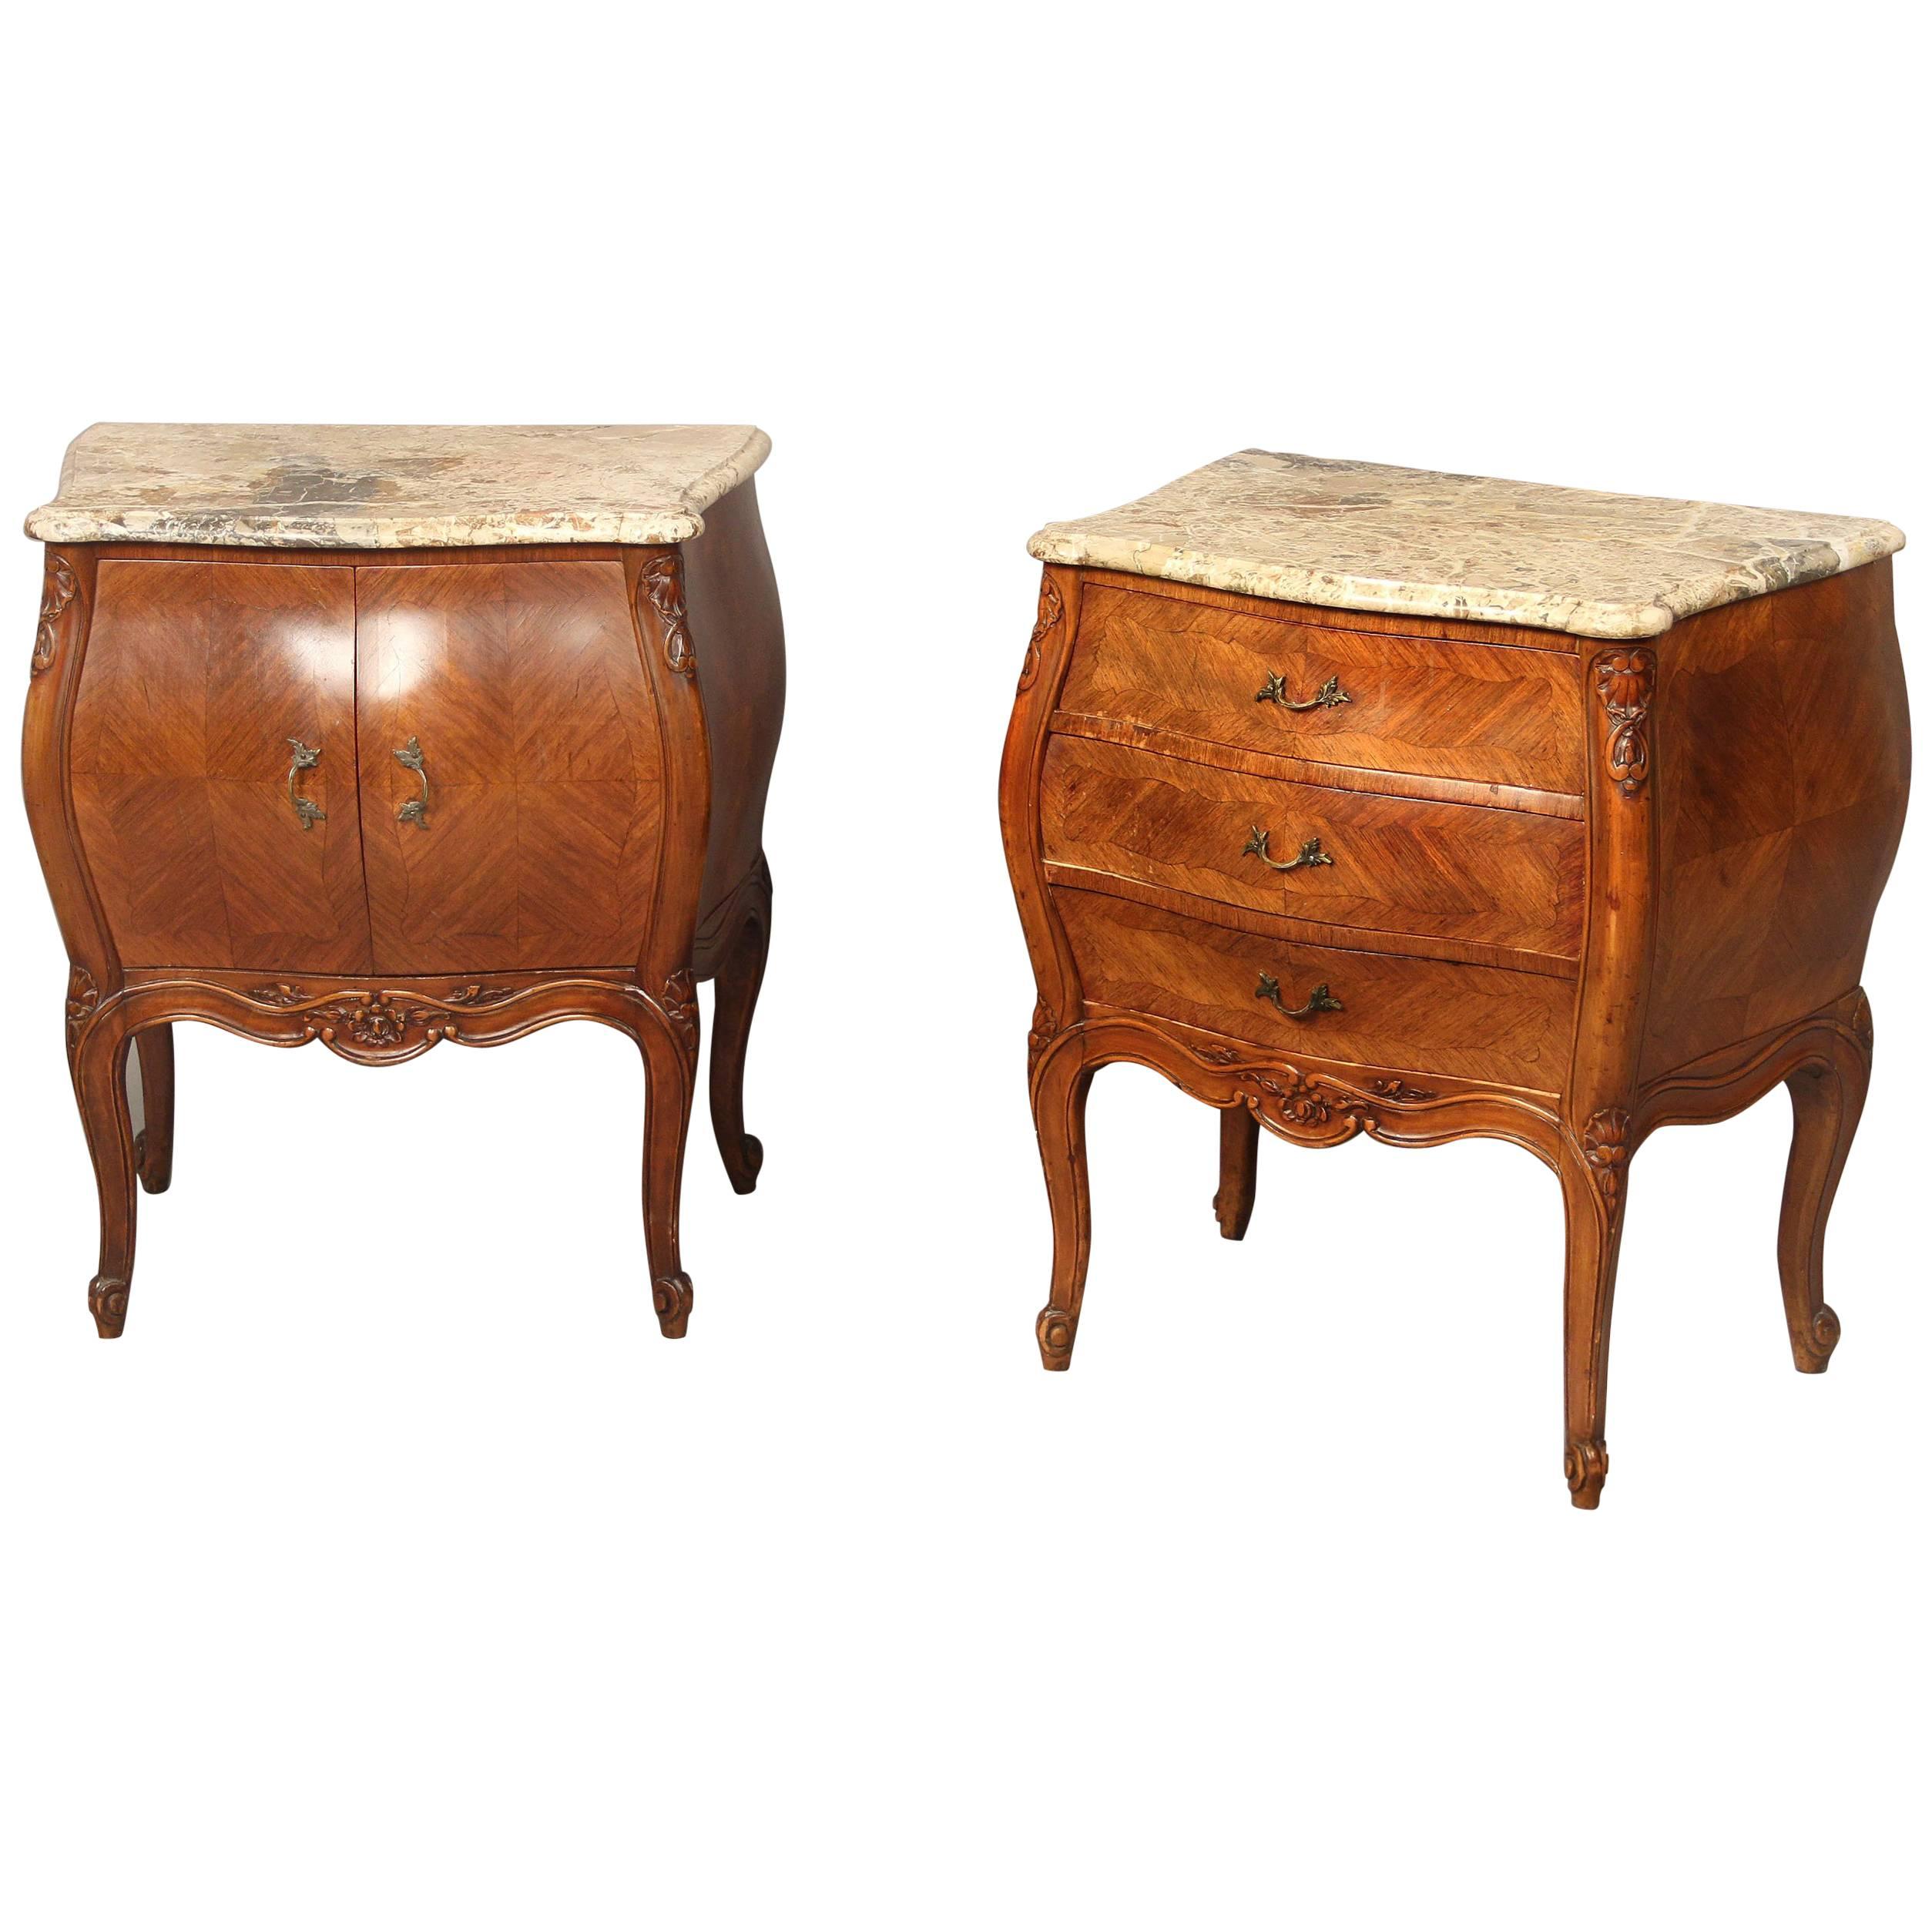 Pair of Late 19th Century Louis XV Style Carved Wood Night Tables